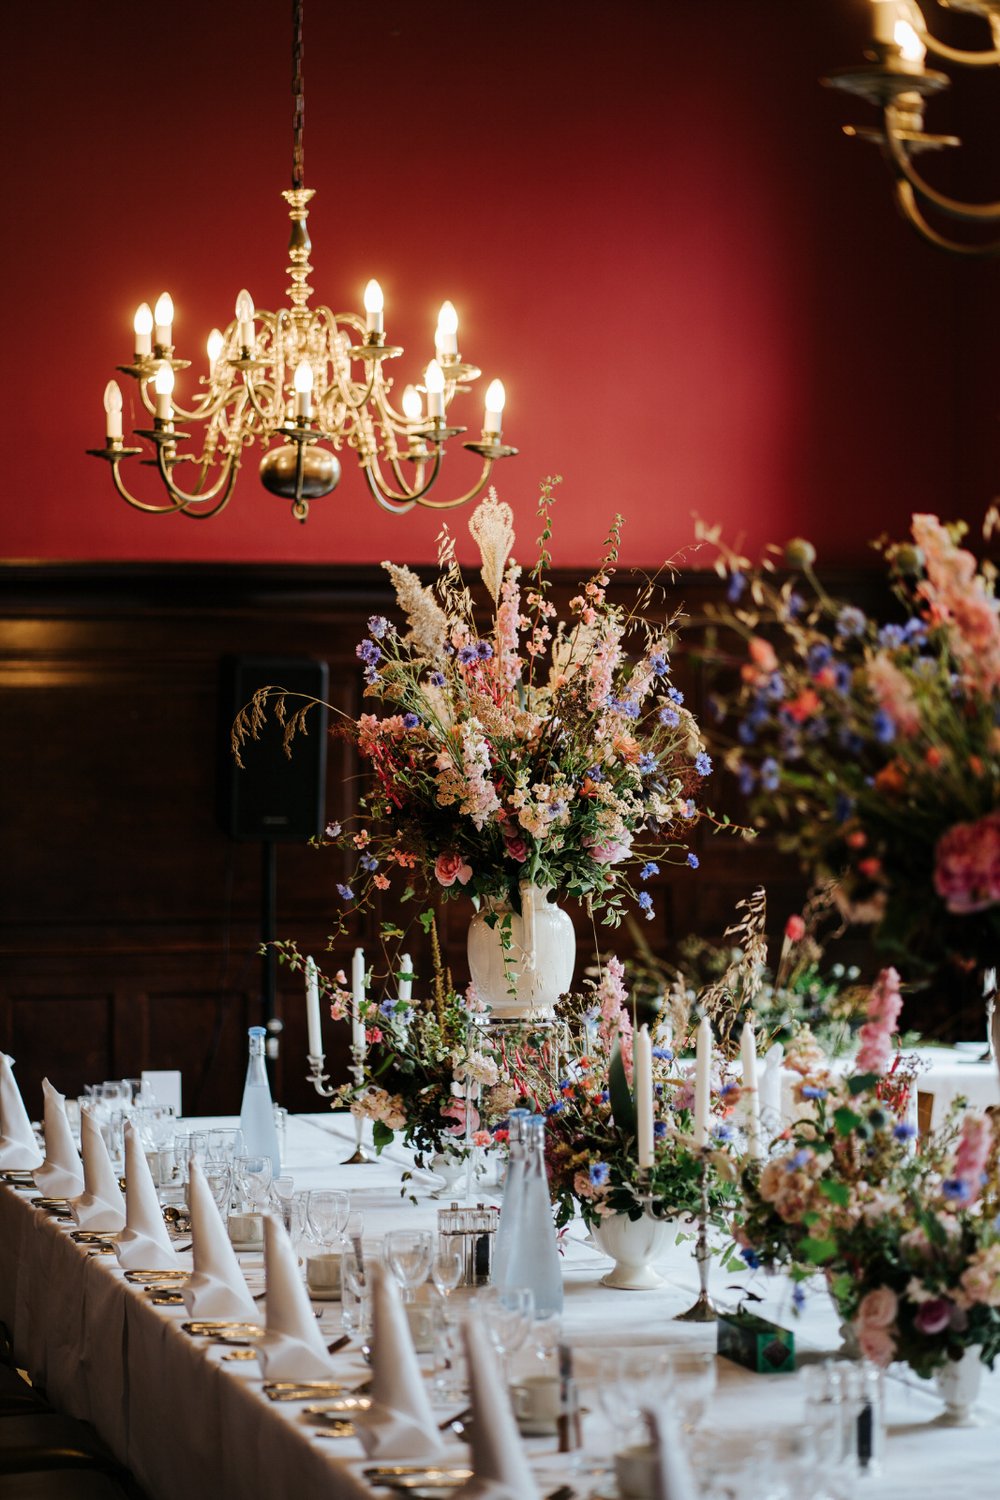 Vase full of colourful and rustic flowers on top of head table at Jesus College in Cambridge with chandelier in background